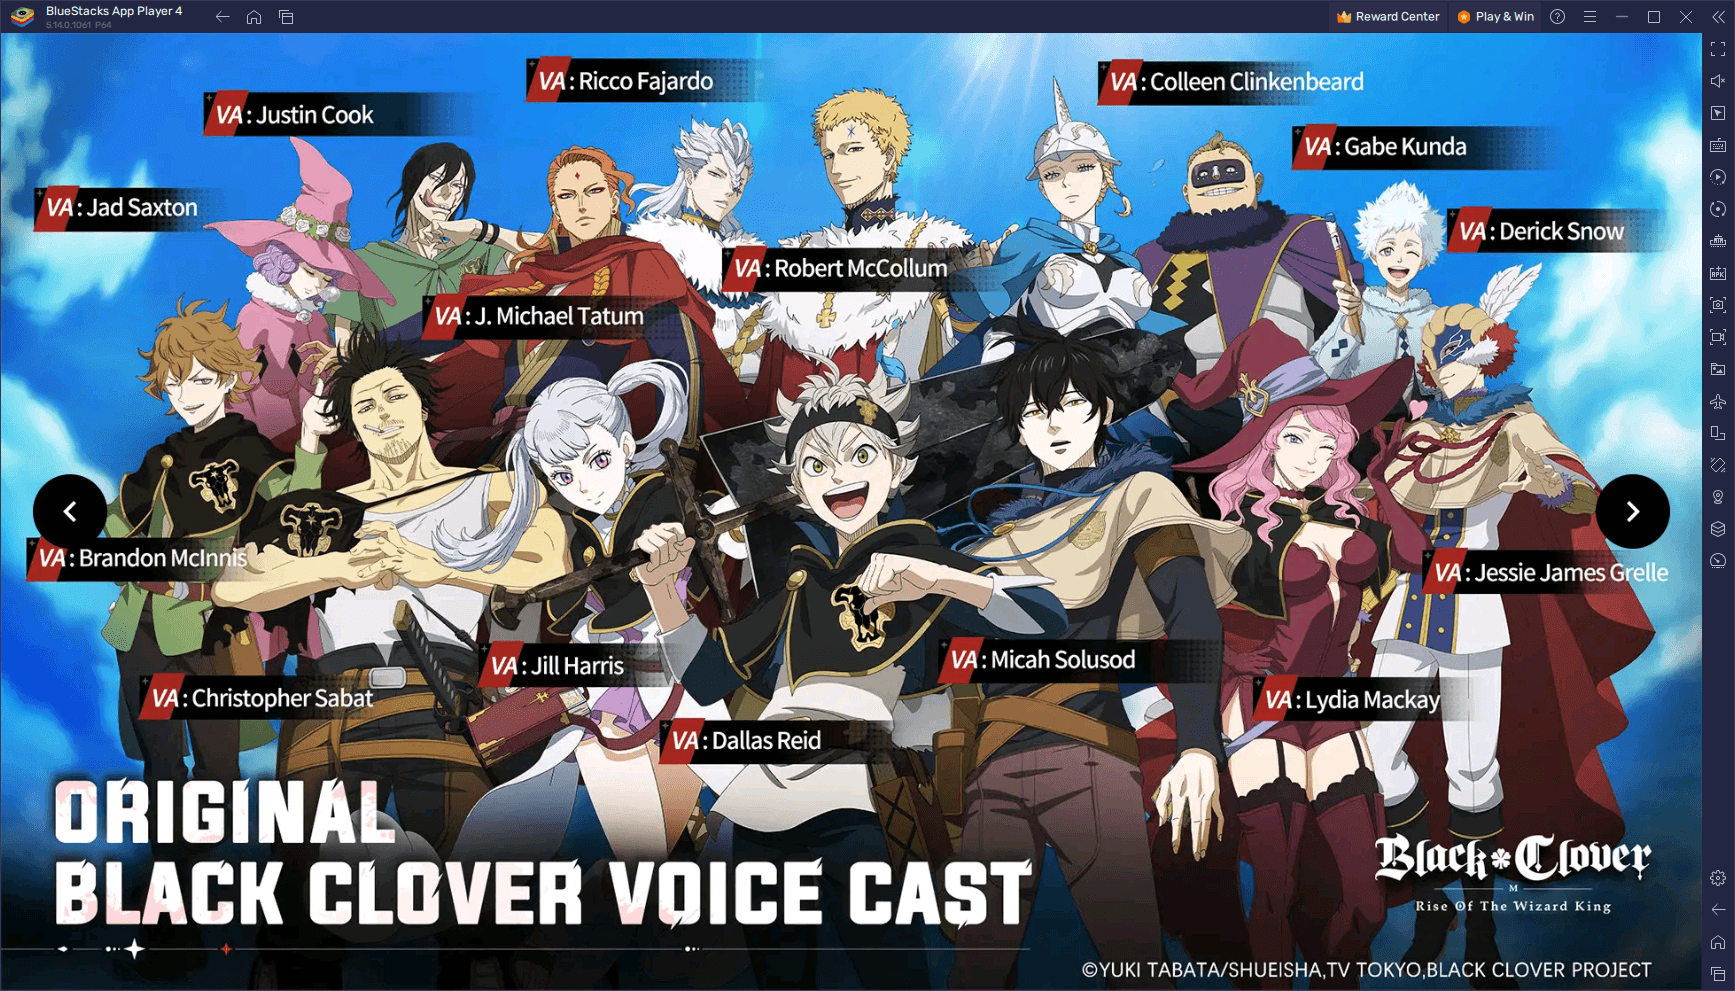 The Best Reroll Guide for Black Clover M - Optimize Your Start in This New Gacha RPG